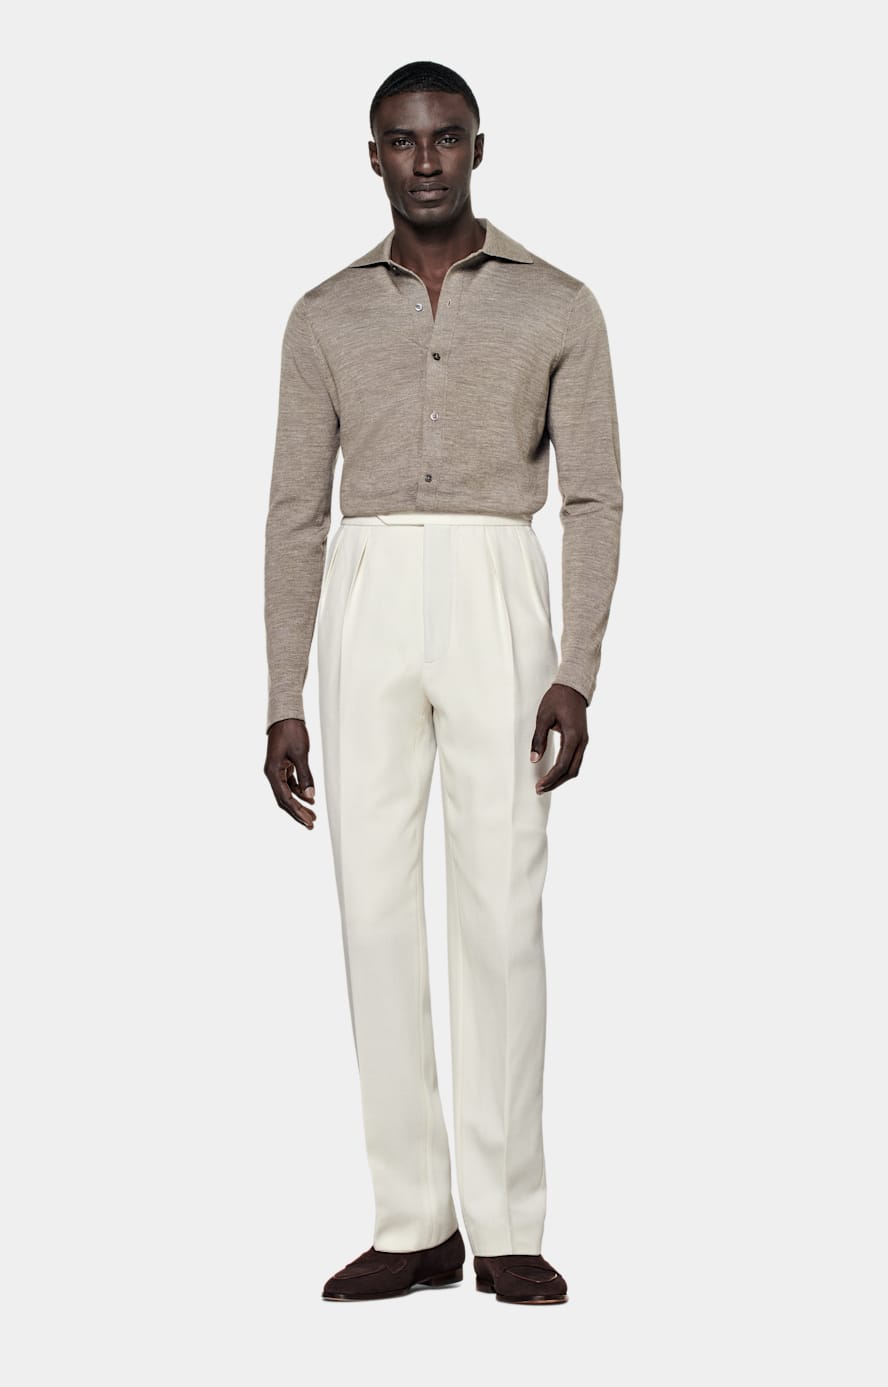 Finding and creating perfect winter wool white or ivory trousers